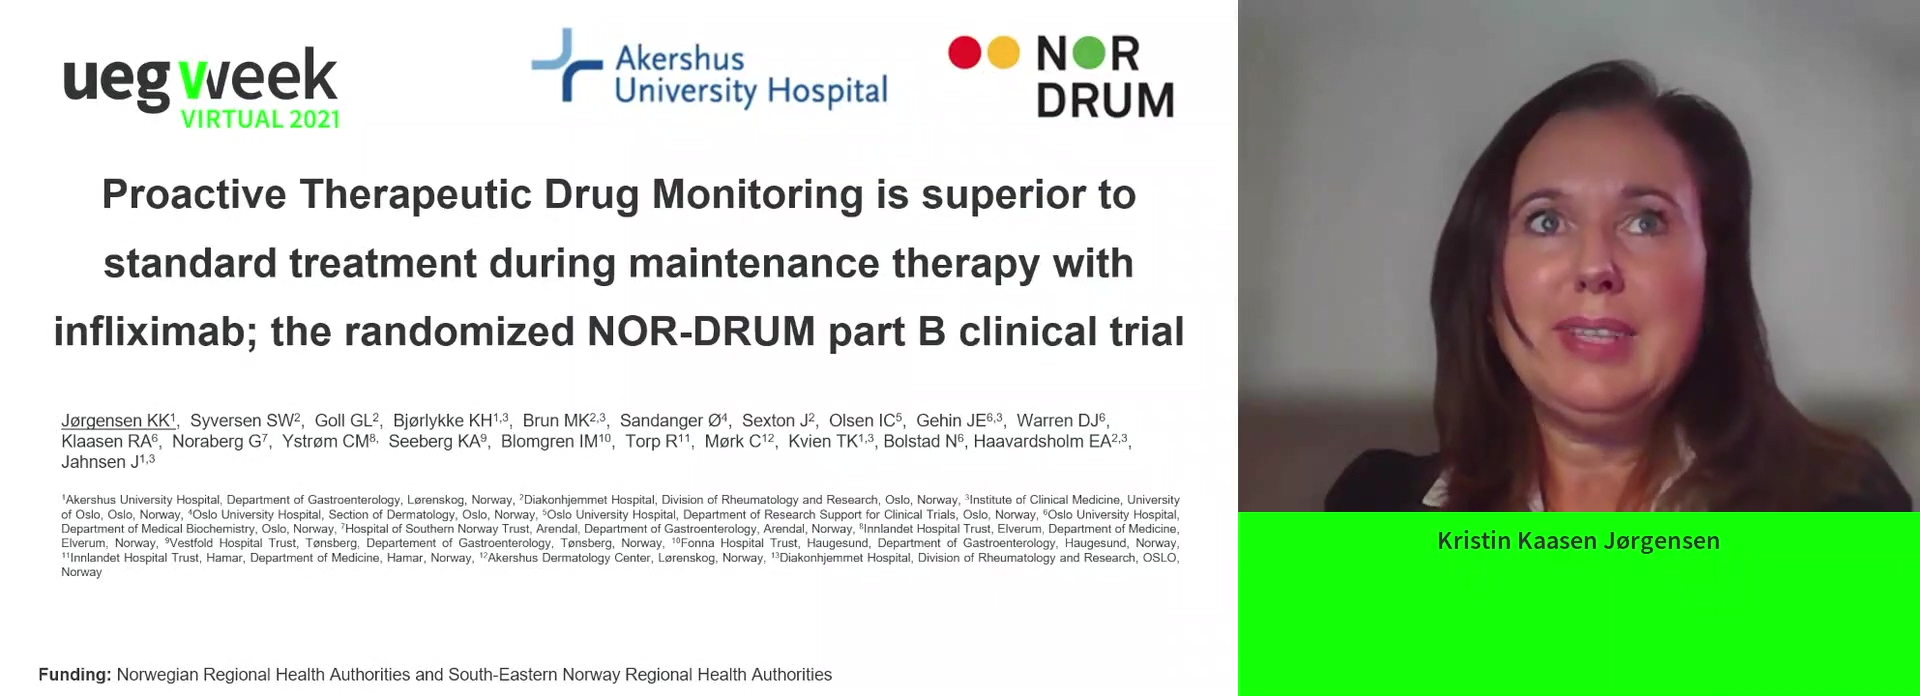 PROACTIVE THERAPEUTIC DRUG MONITORING IS SUPERIOR TO STANDARD TREATMENT DURING MAINTENANCE THERAPY WITH INFLIXIMAB; THE RANDOMIZED NOR-DRUM PART B CLINICAL TRIAL